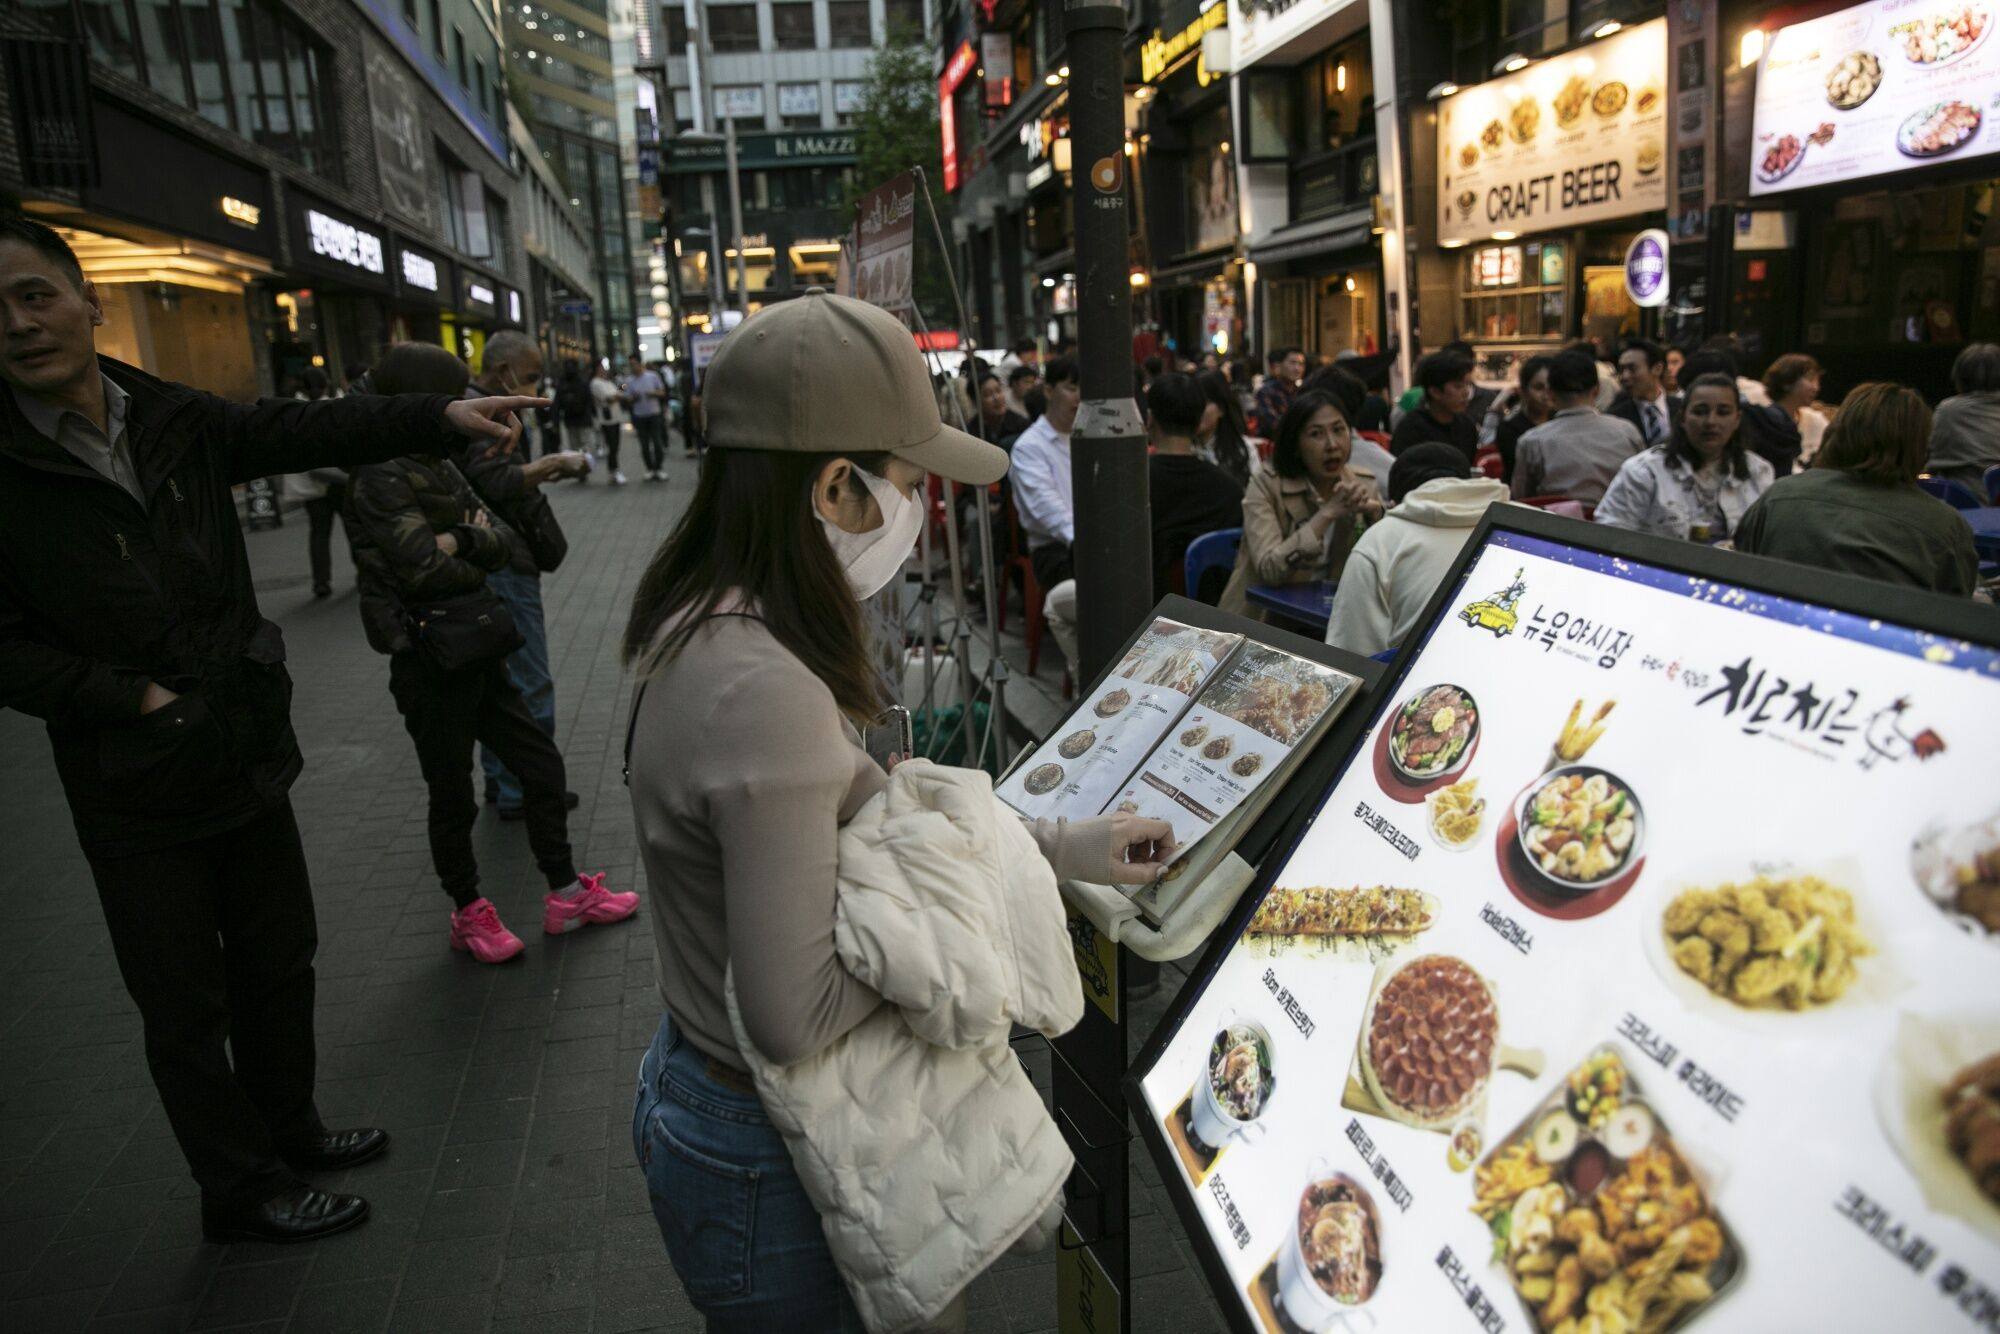 A customer outside a restaurant in Seoul’s Myeongdong shopping district. The Deloitte report showed that south Koreans’ conspicuous consumption in the food and beverage sector is about three to four times higher compared to spending on household items. Photo: Bloomberg